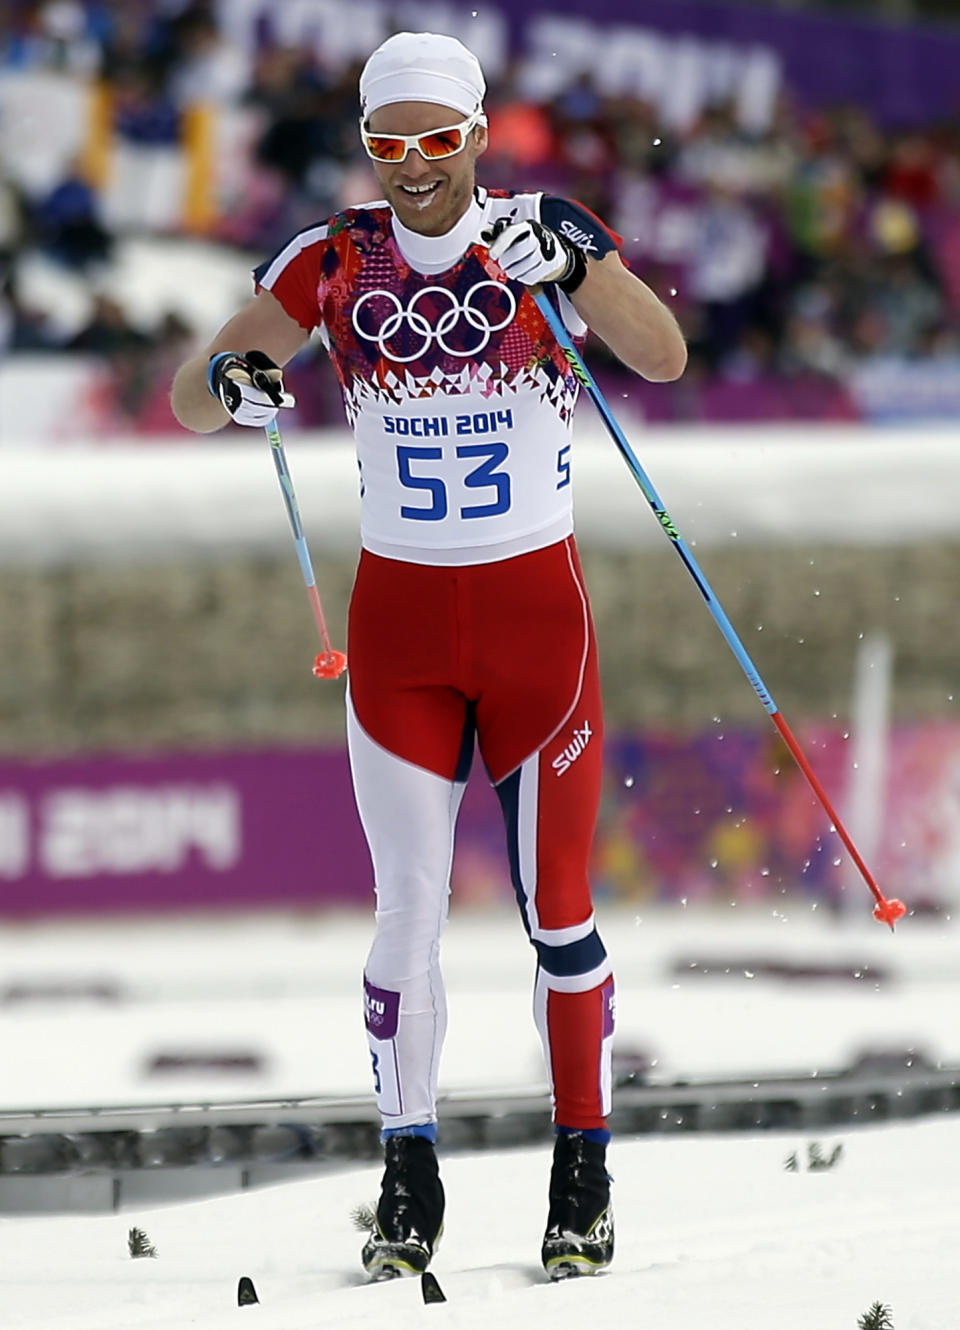 Norway's Martin Johnsrud Sundby competes with his sleeves cut, during the men's 15K classical-style cross-country race at the 2014 Winter Olympics, Friday, Feb. 14, 2014, in Krasnaya Polyana, Russia. (AP Photo/Gregorio Borgia)